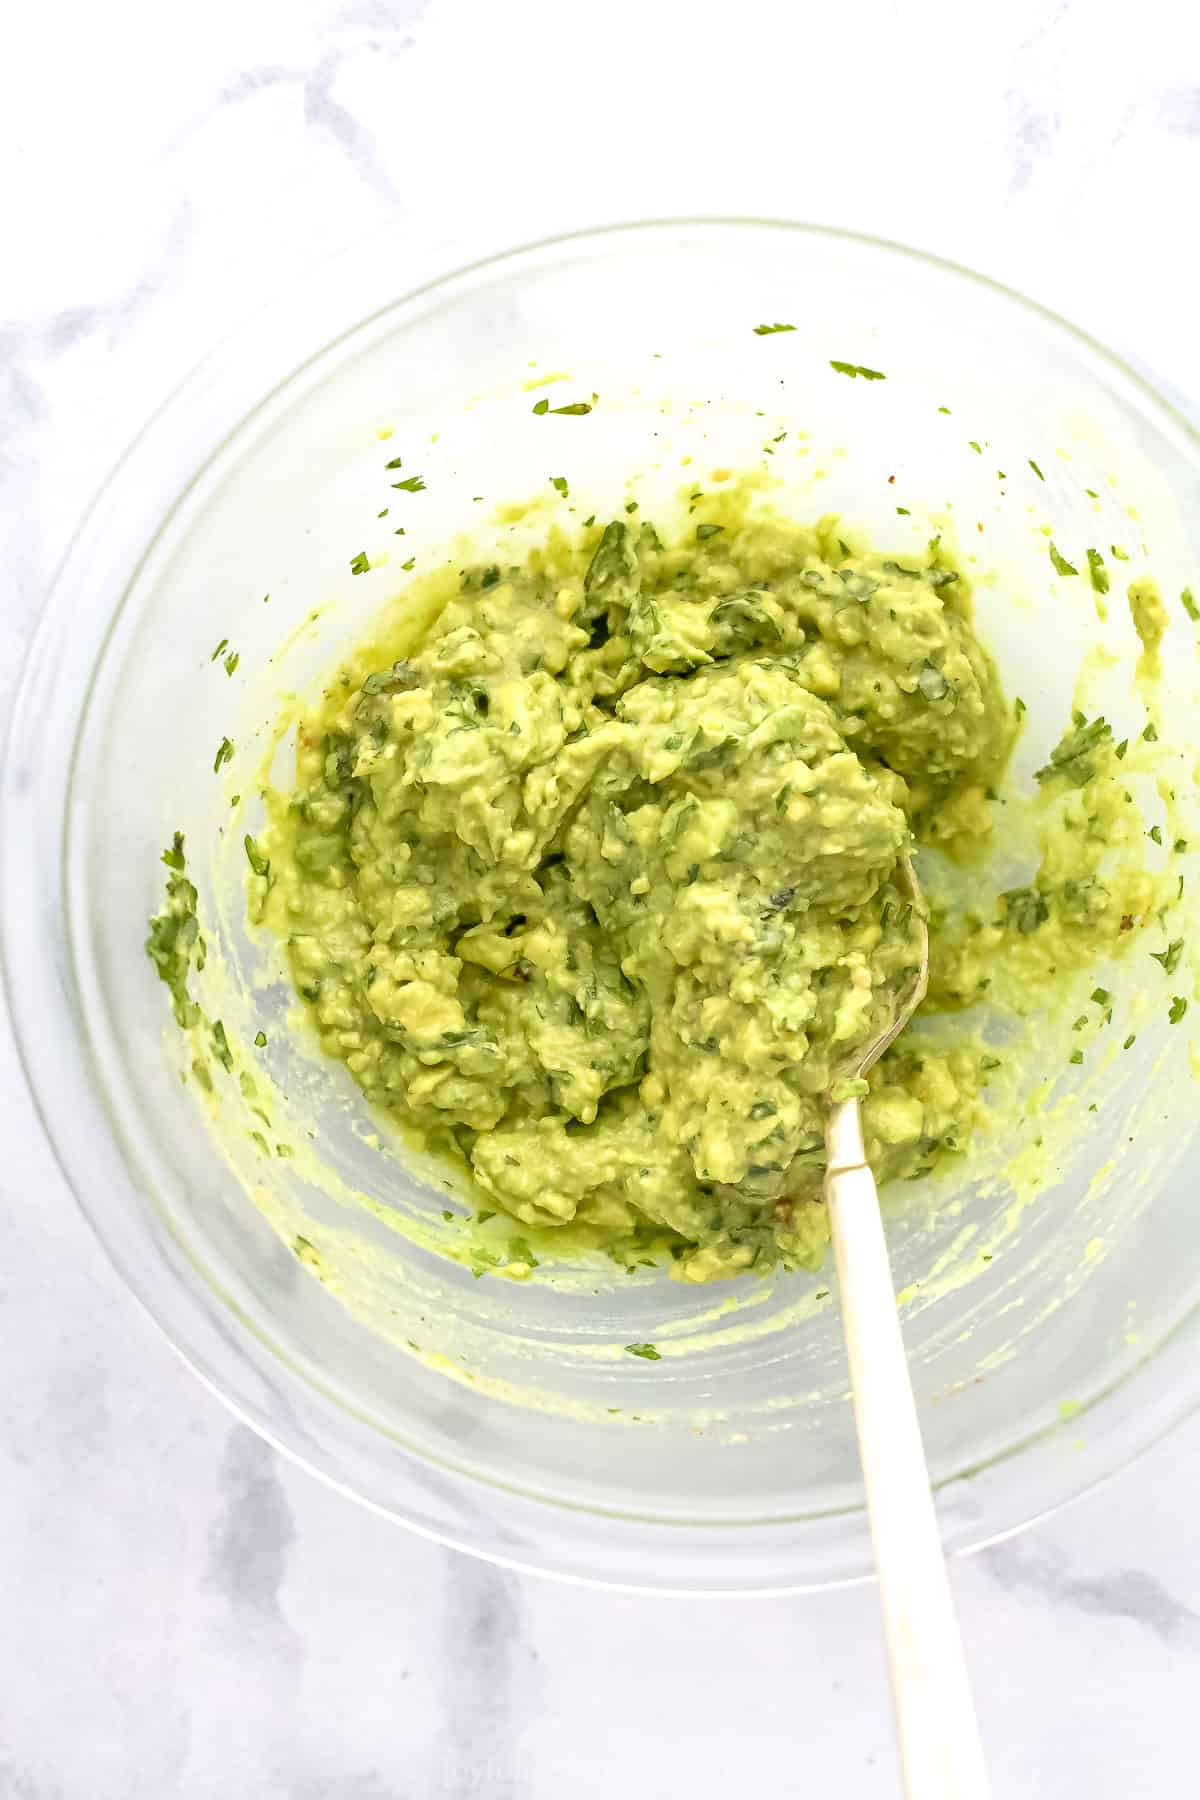 Guacamole being mixed with a spoon in a glass mixing bowl